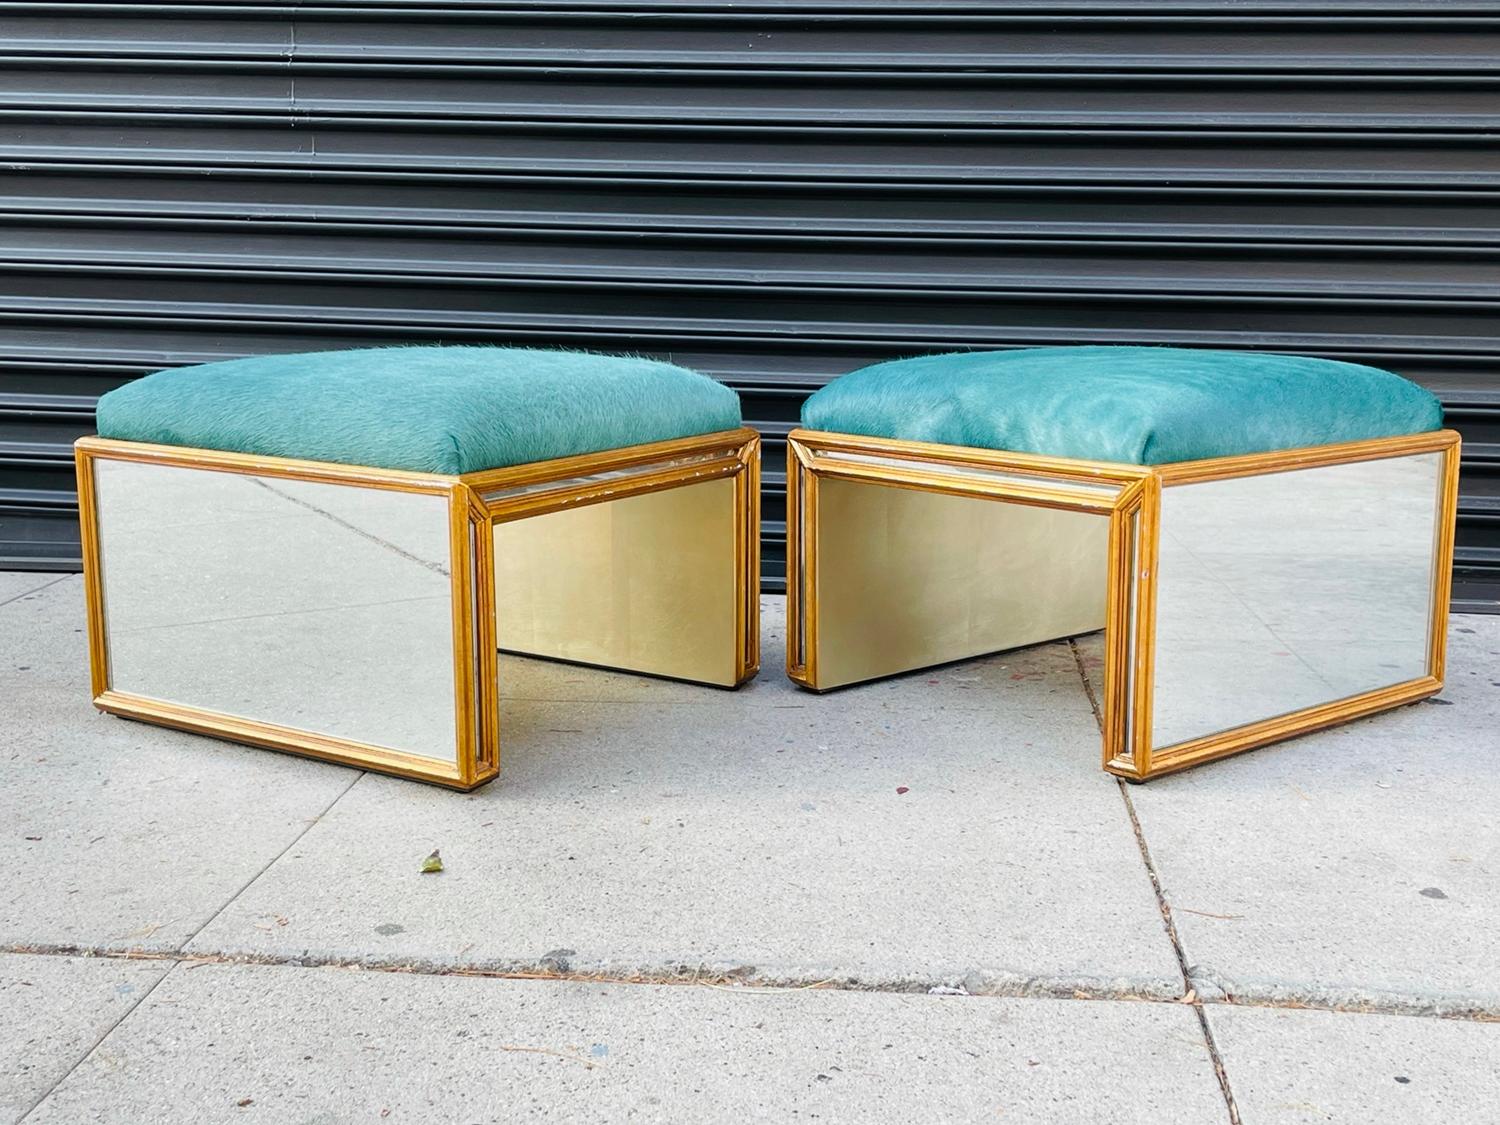 Late 20th Century Pair of Regency Style Benches with Green Pony Hair Upholstery & Antique Mirror